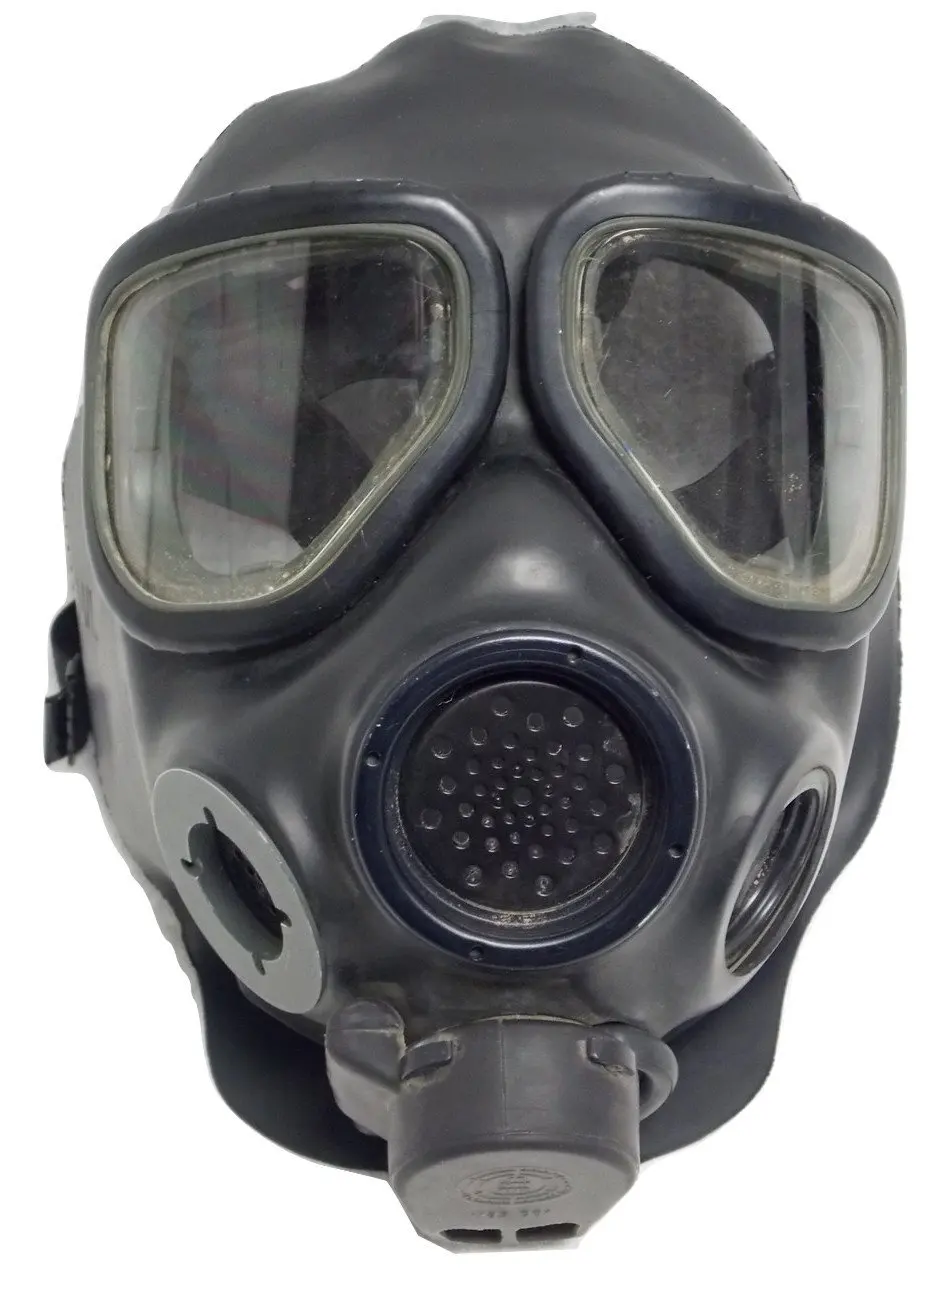 285.95. 3M full face respirator FR-M40 gas mask size large. 